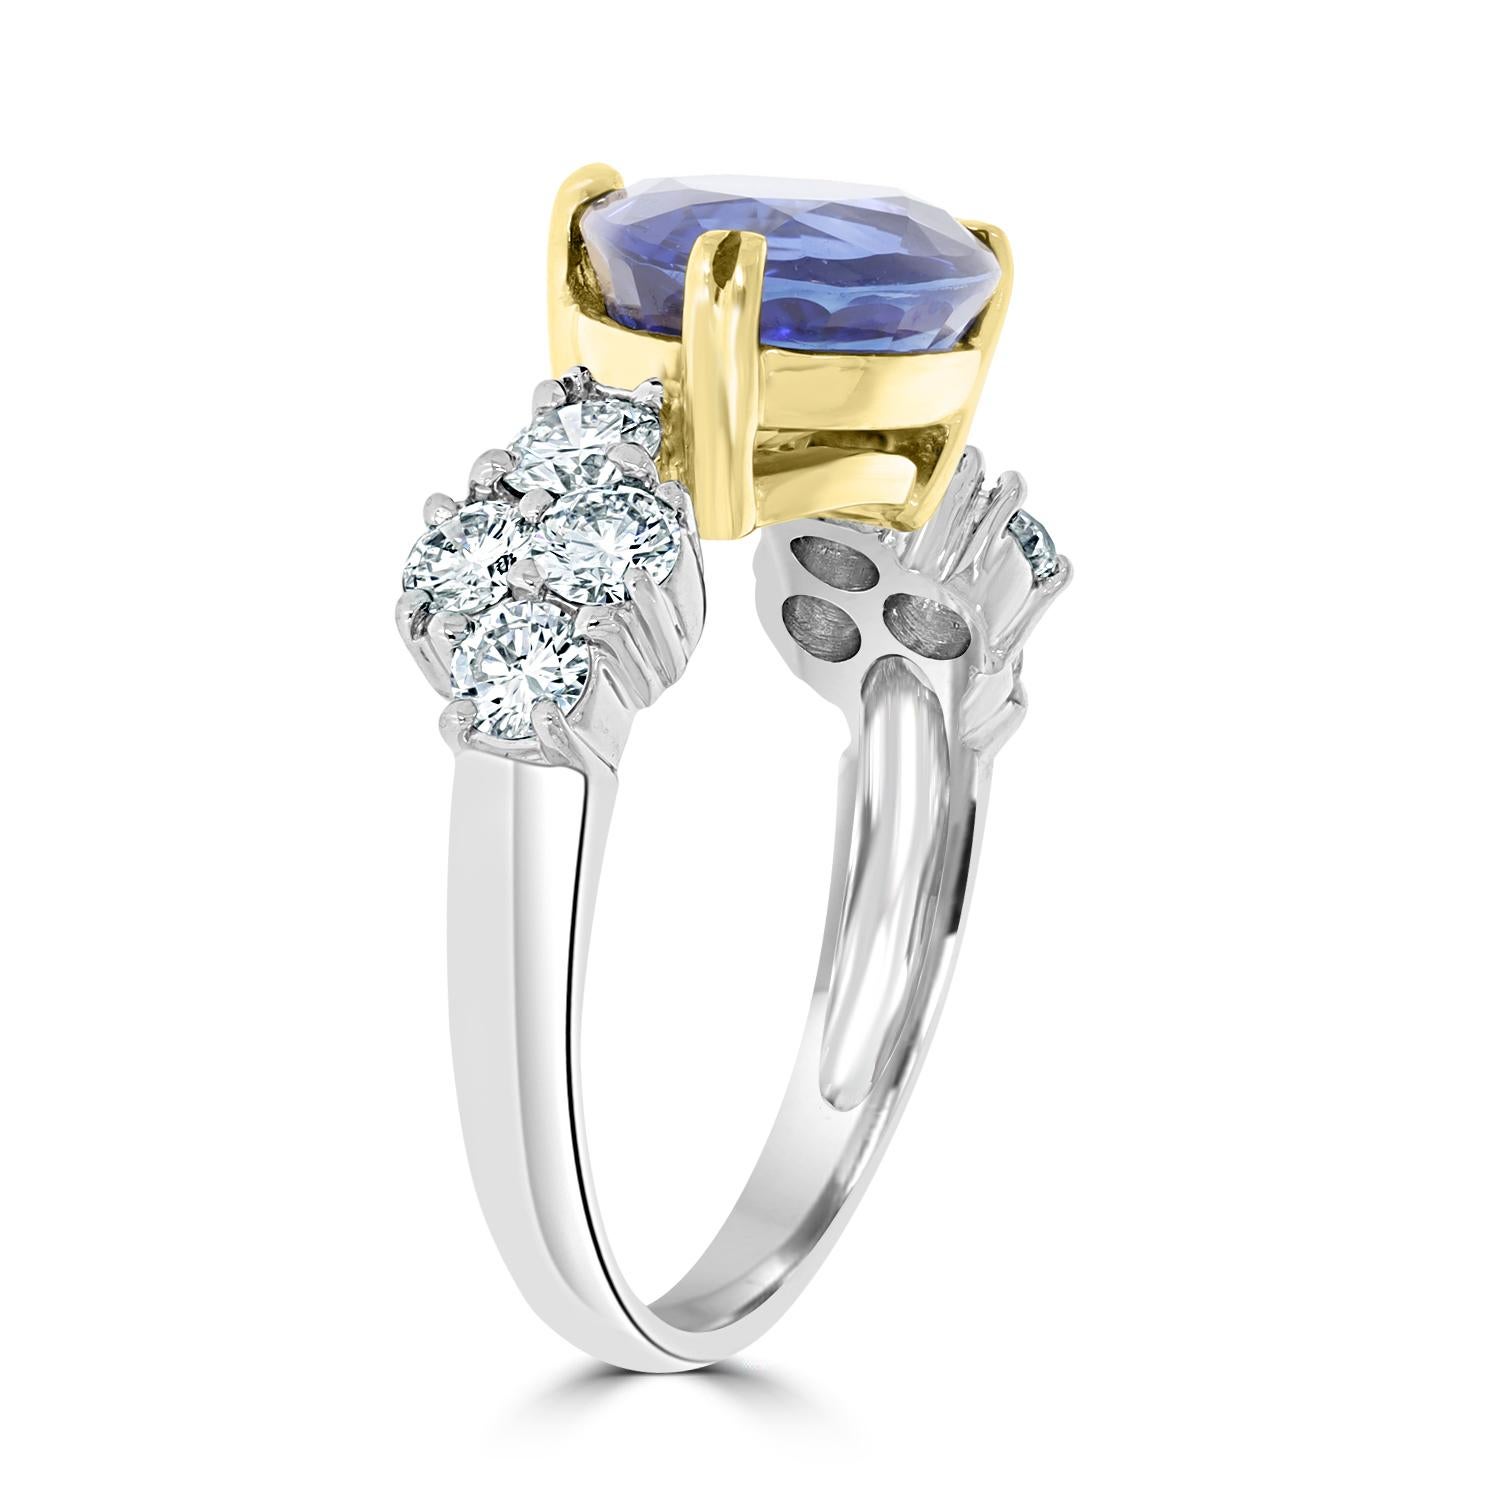 Modern 4.07ct Sapphire Ring with 0.82ct Diamonds Set in Platinum/18k For Sale